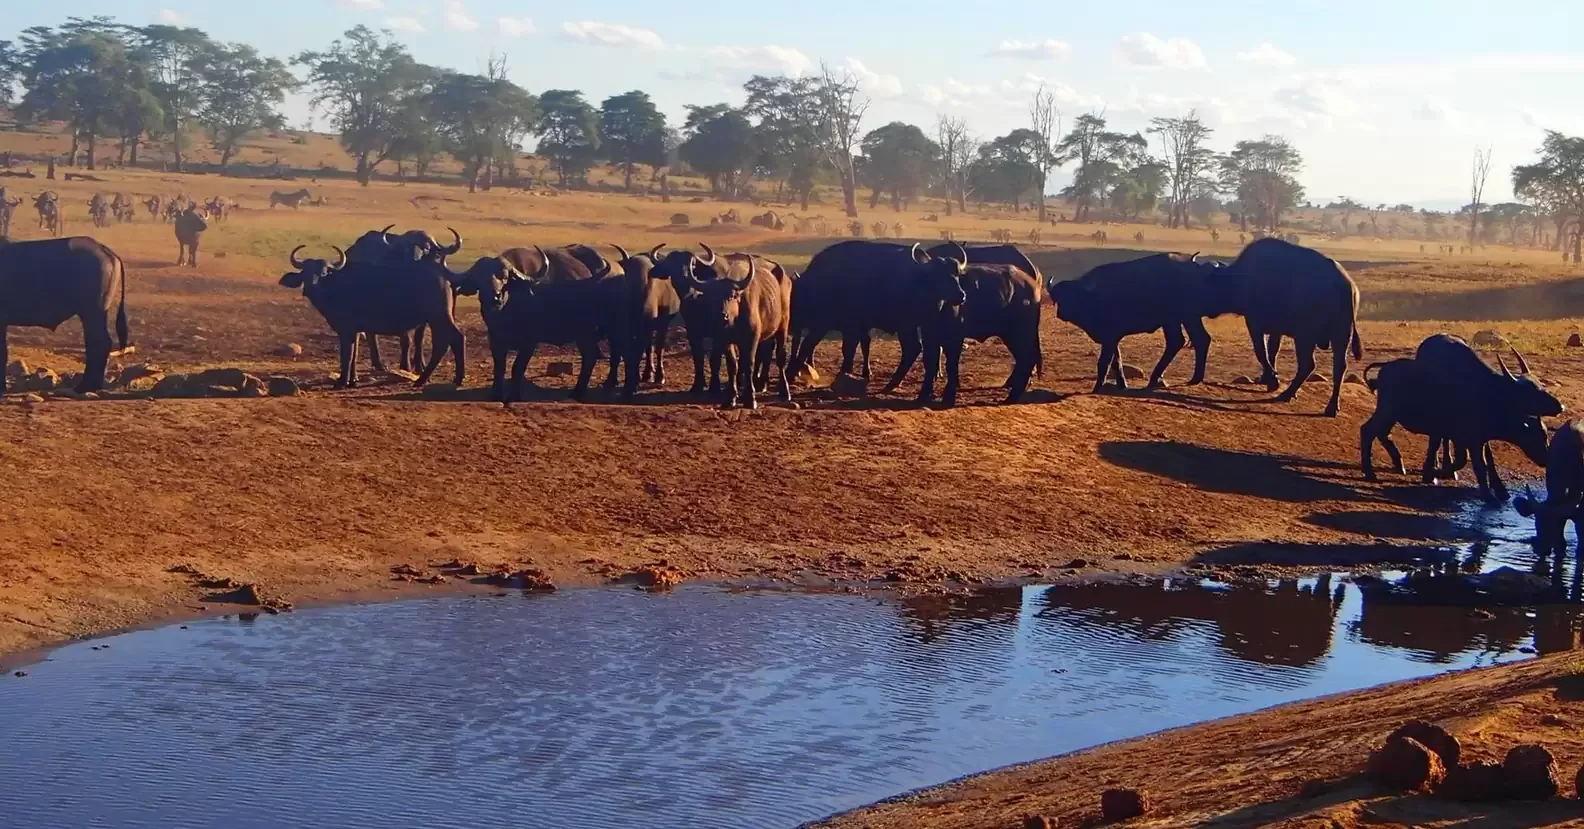 A man travels for hours daily through a drought to provide water for wild animals 2